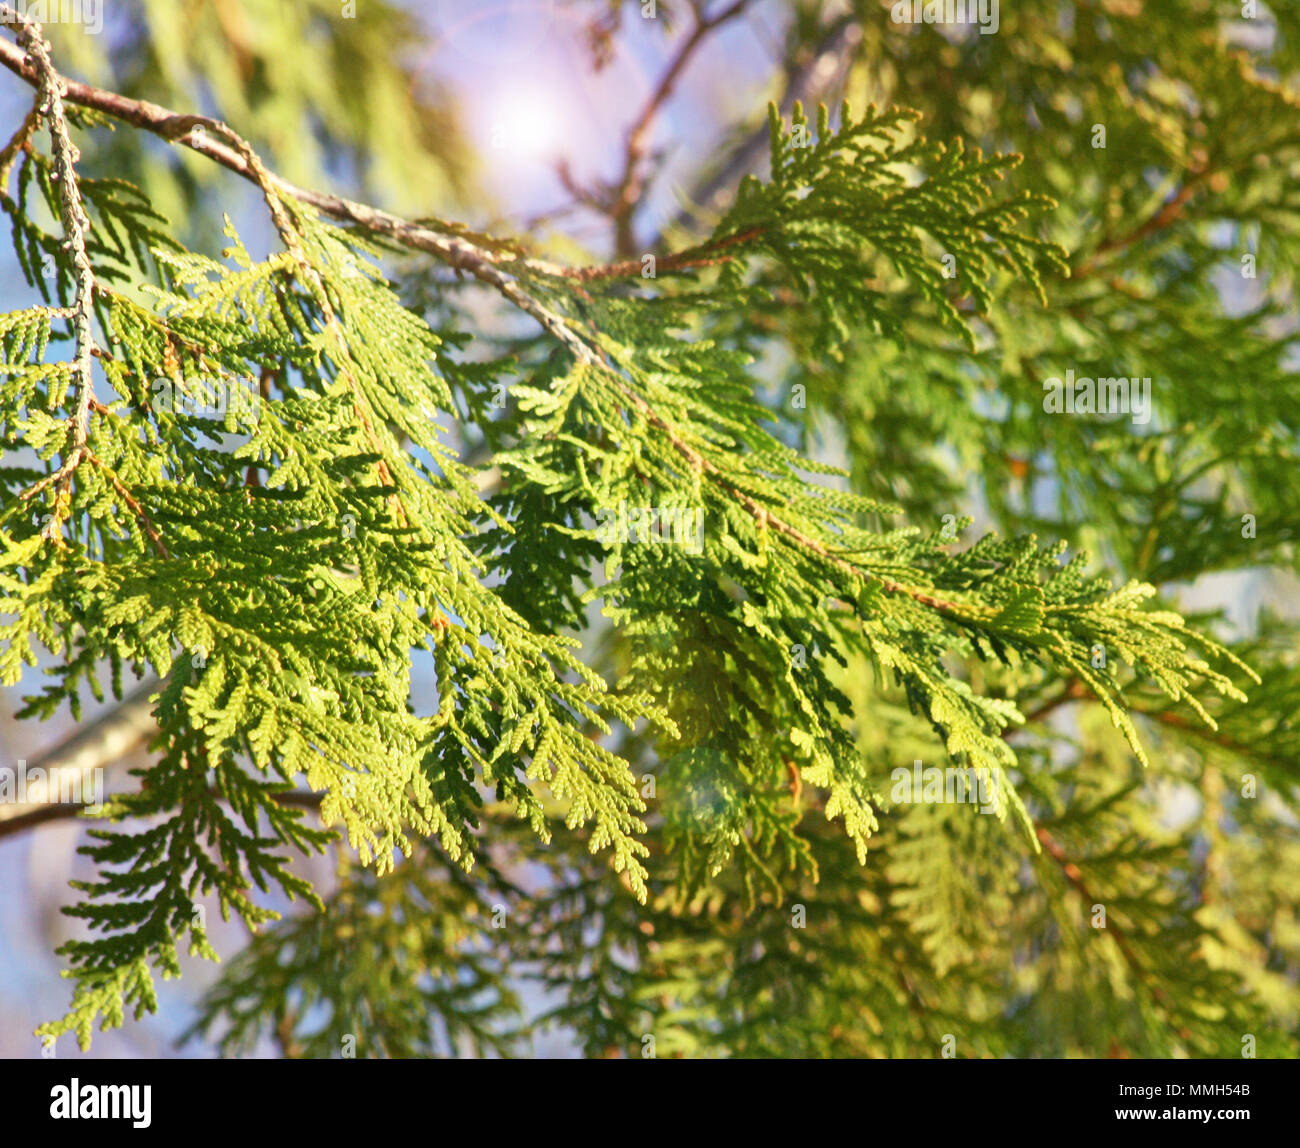 The spindly branches and leaves of a Cedar Tree with illuminating light in background Stock Photo